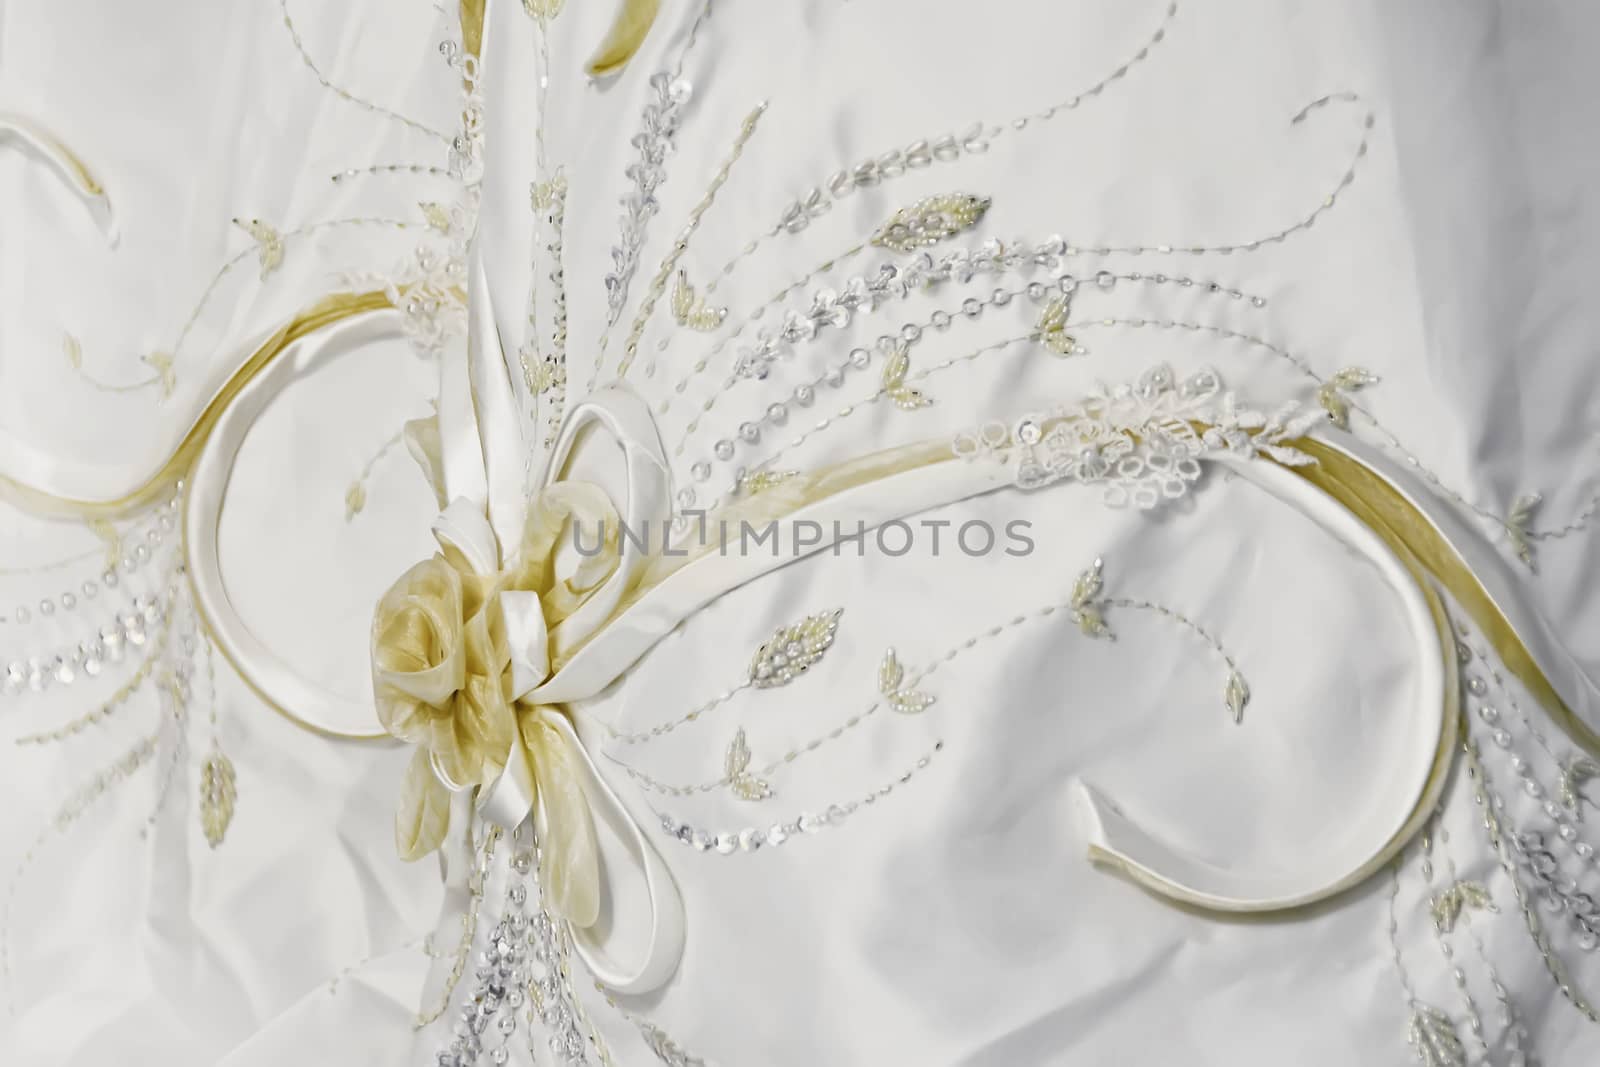 Texture of white, sequined wedding gown with flower